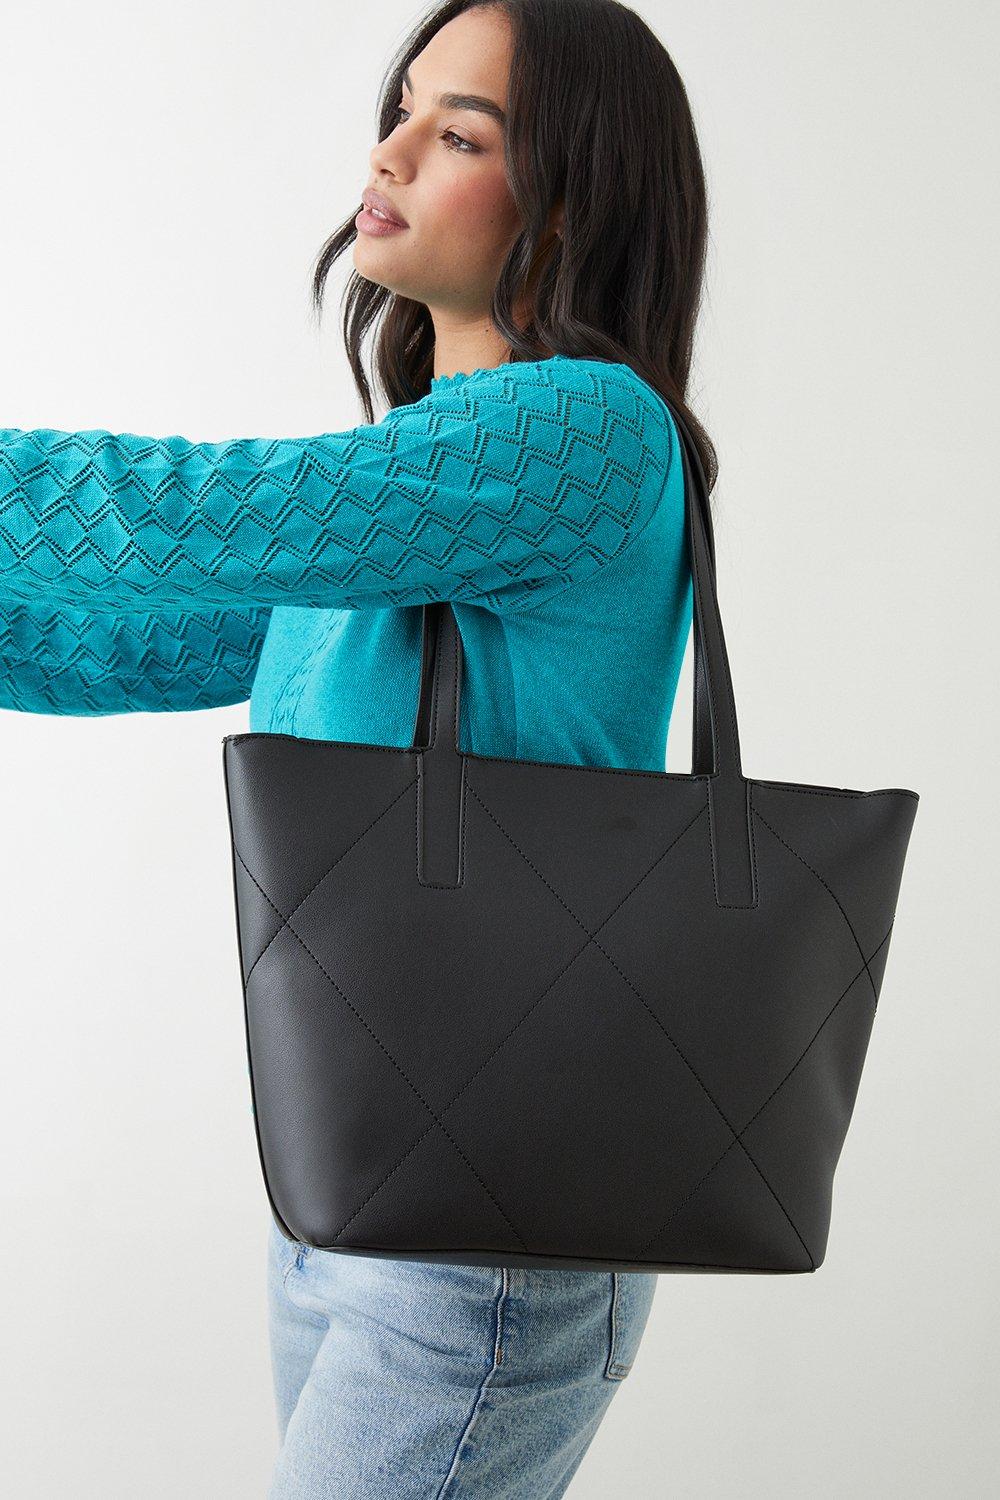 Women's Taylor Tote Bag - black - ONE SIZE